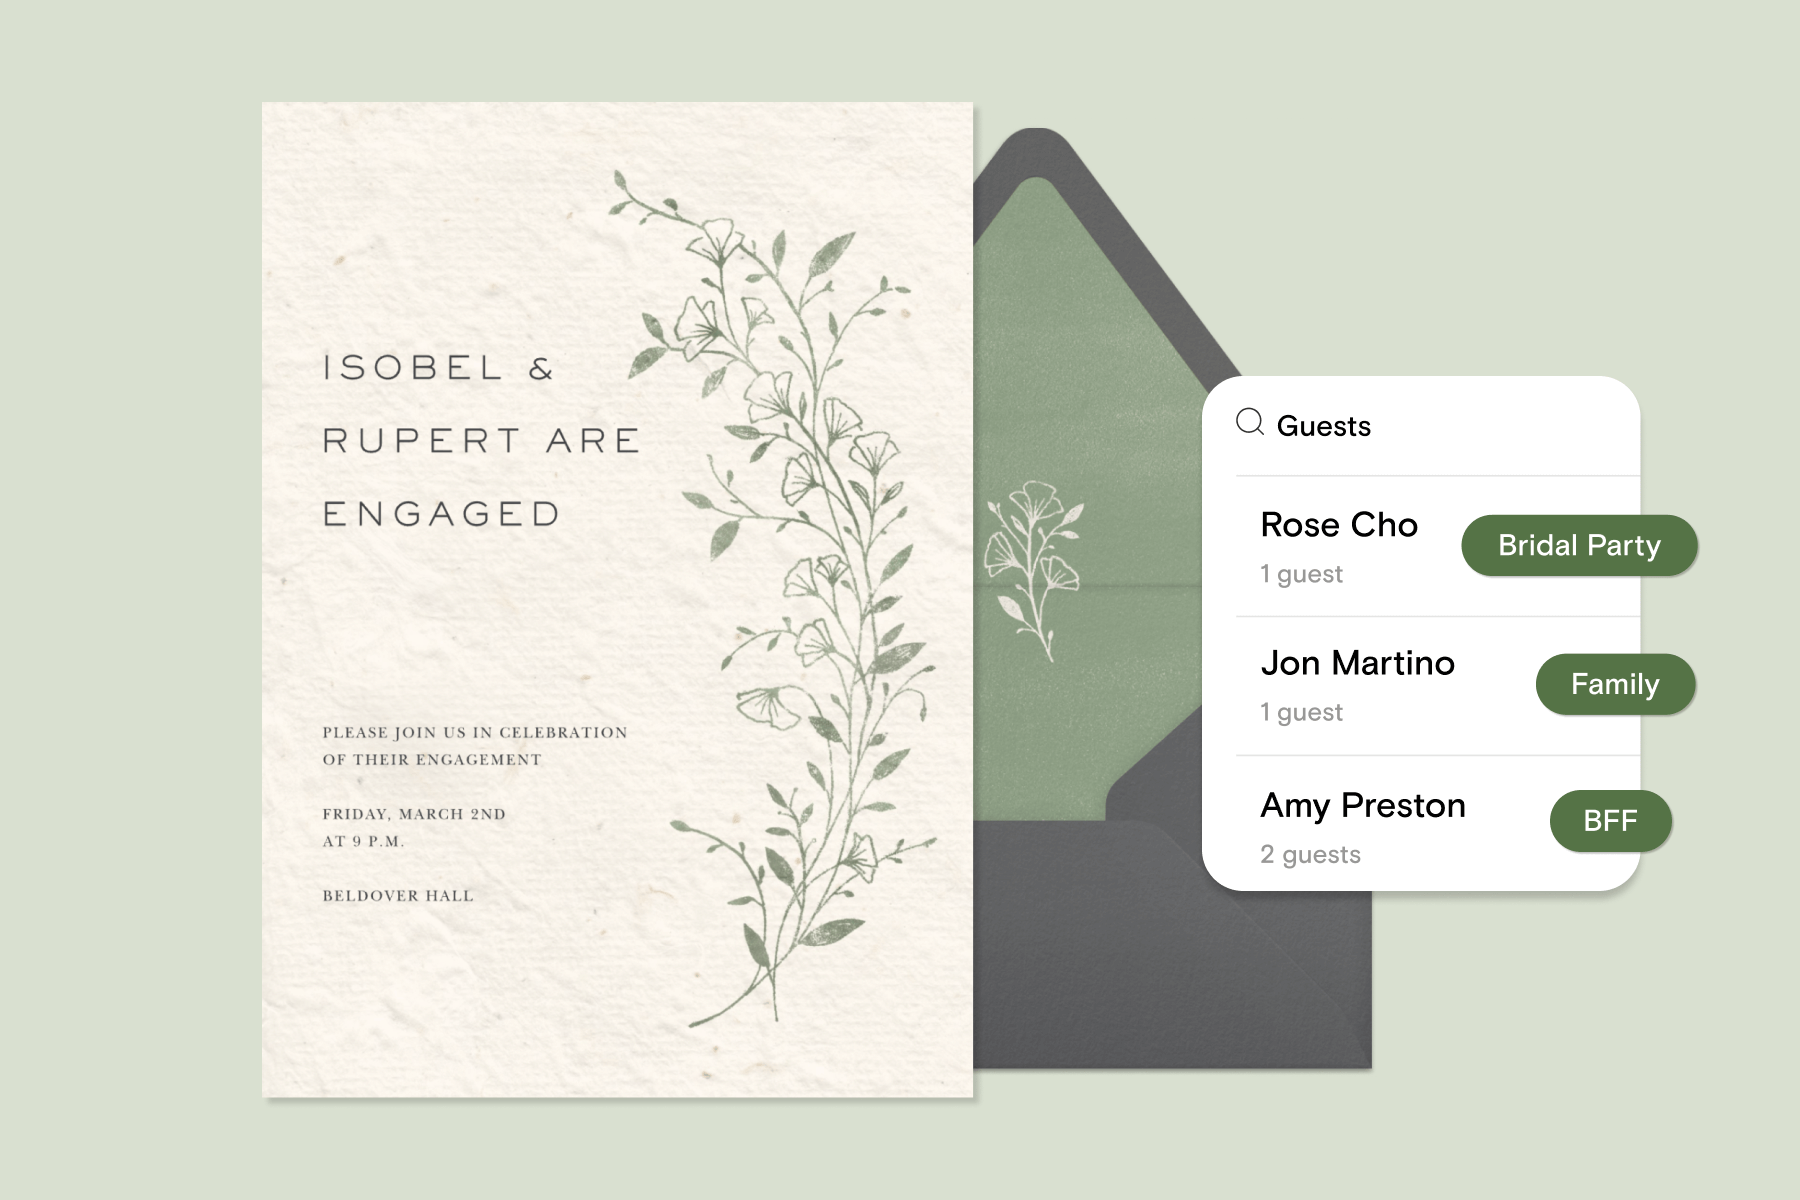 A cream wedding invitation with a sage floral motif, matching envelope, and an illustration of the Paperless Post feature Guest Tags.